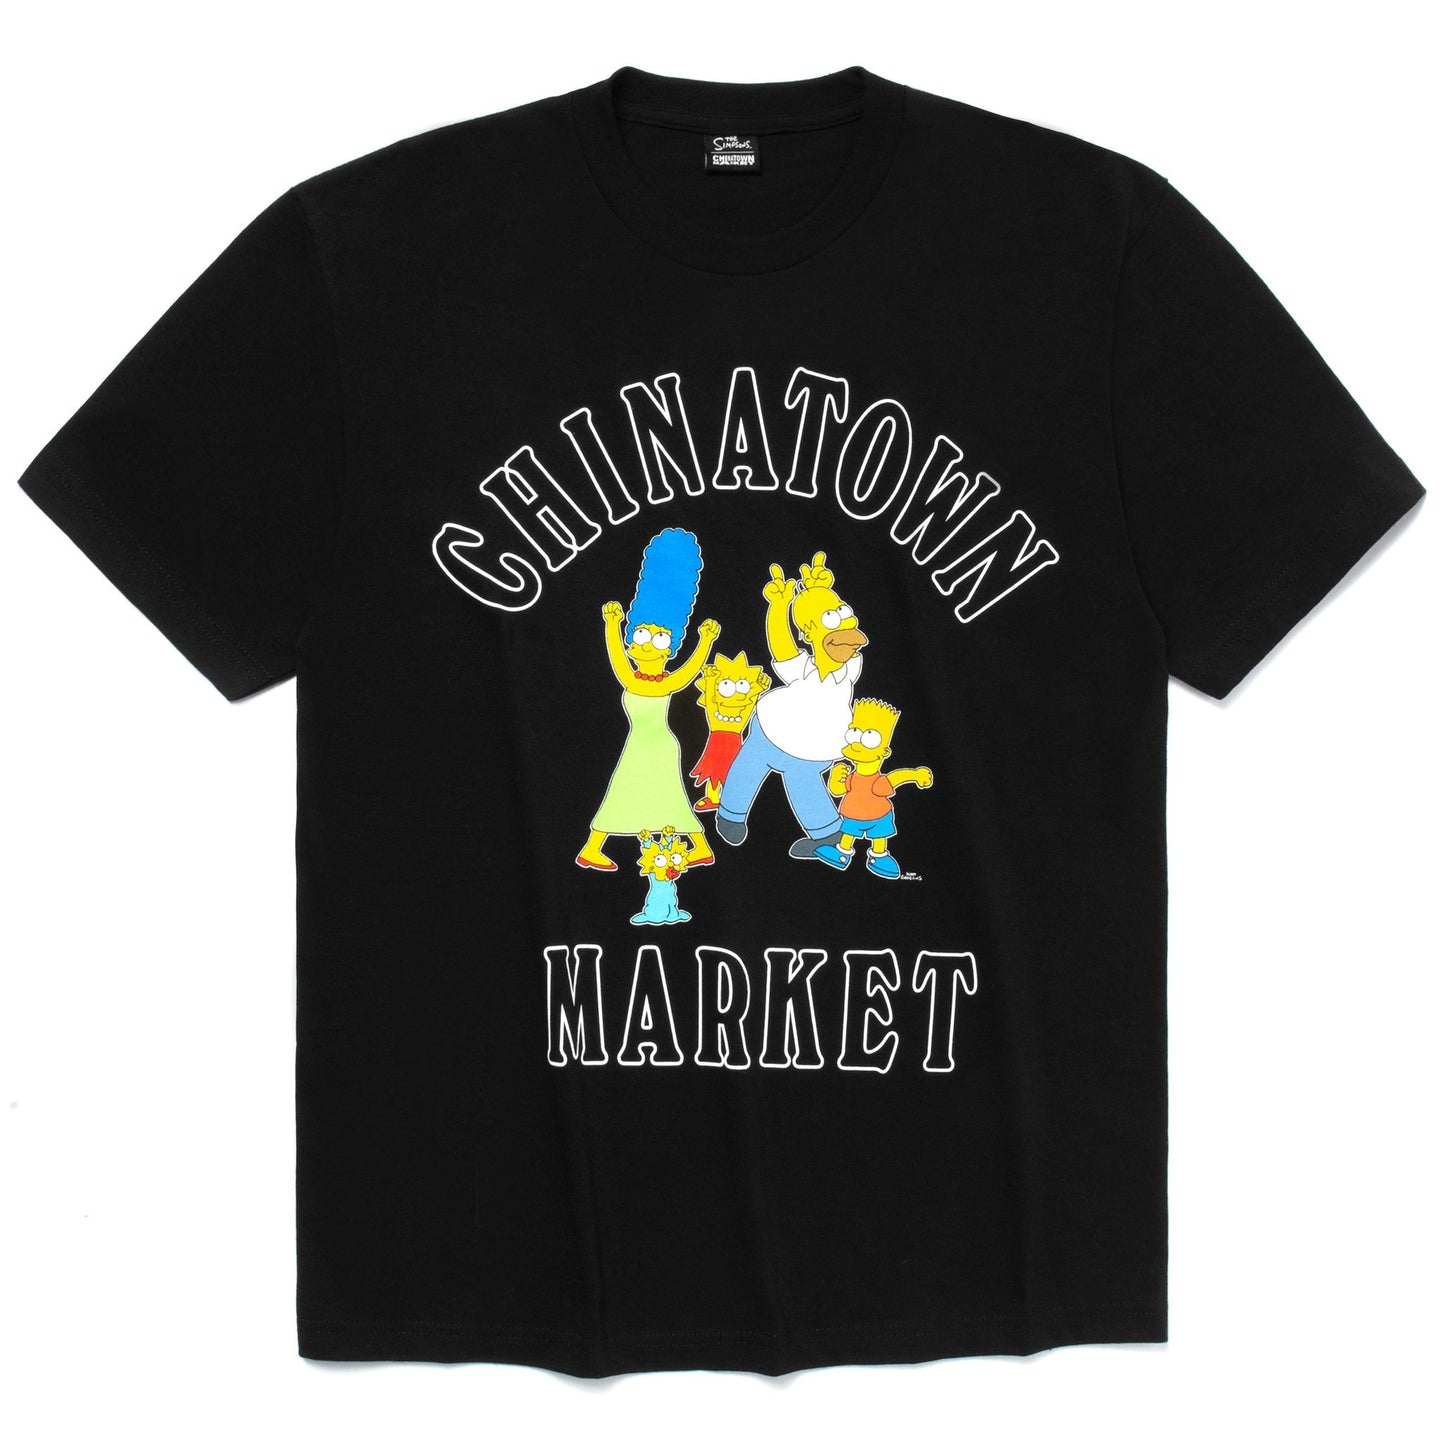 Chinatown Market x The Simpsons Family OG T-Shirt